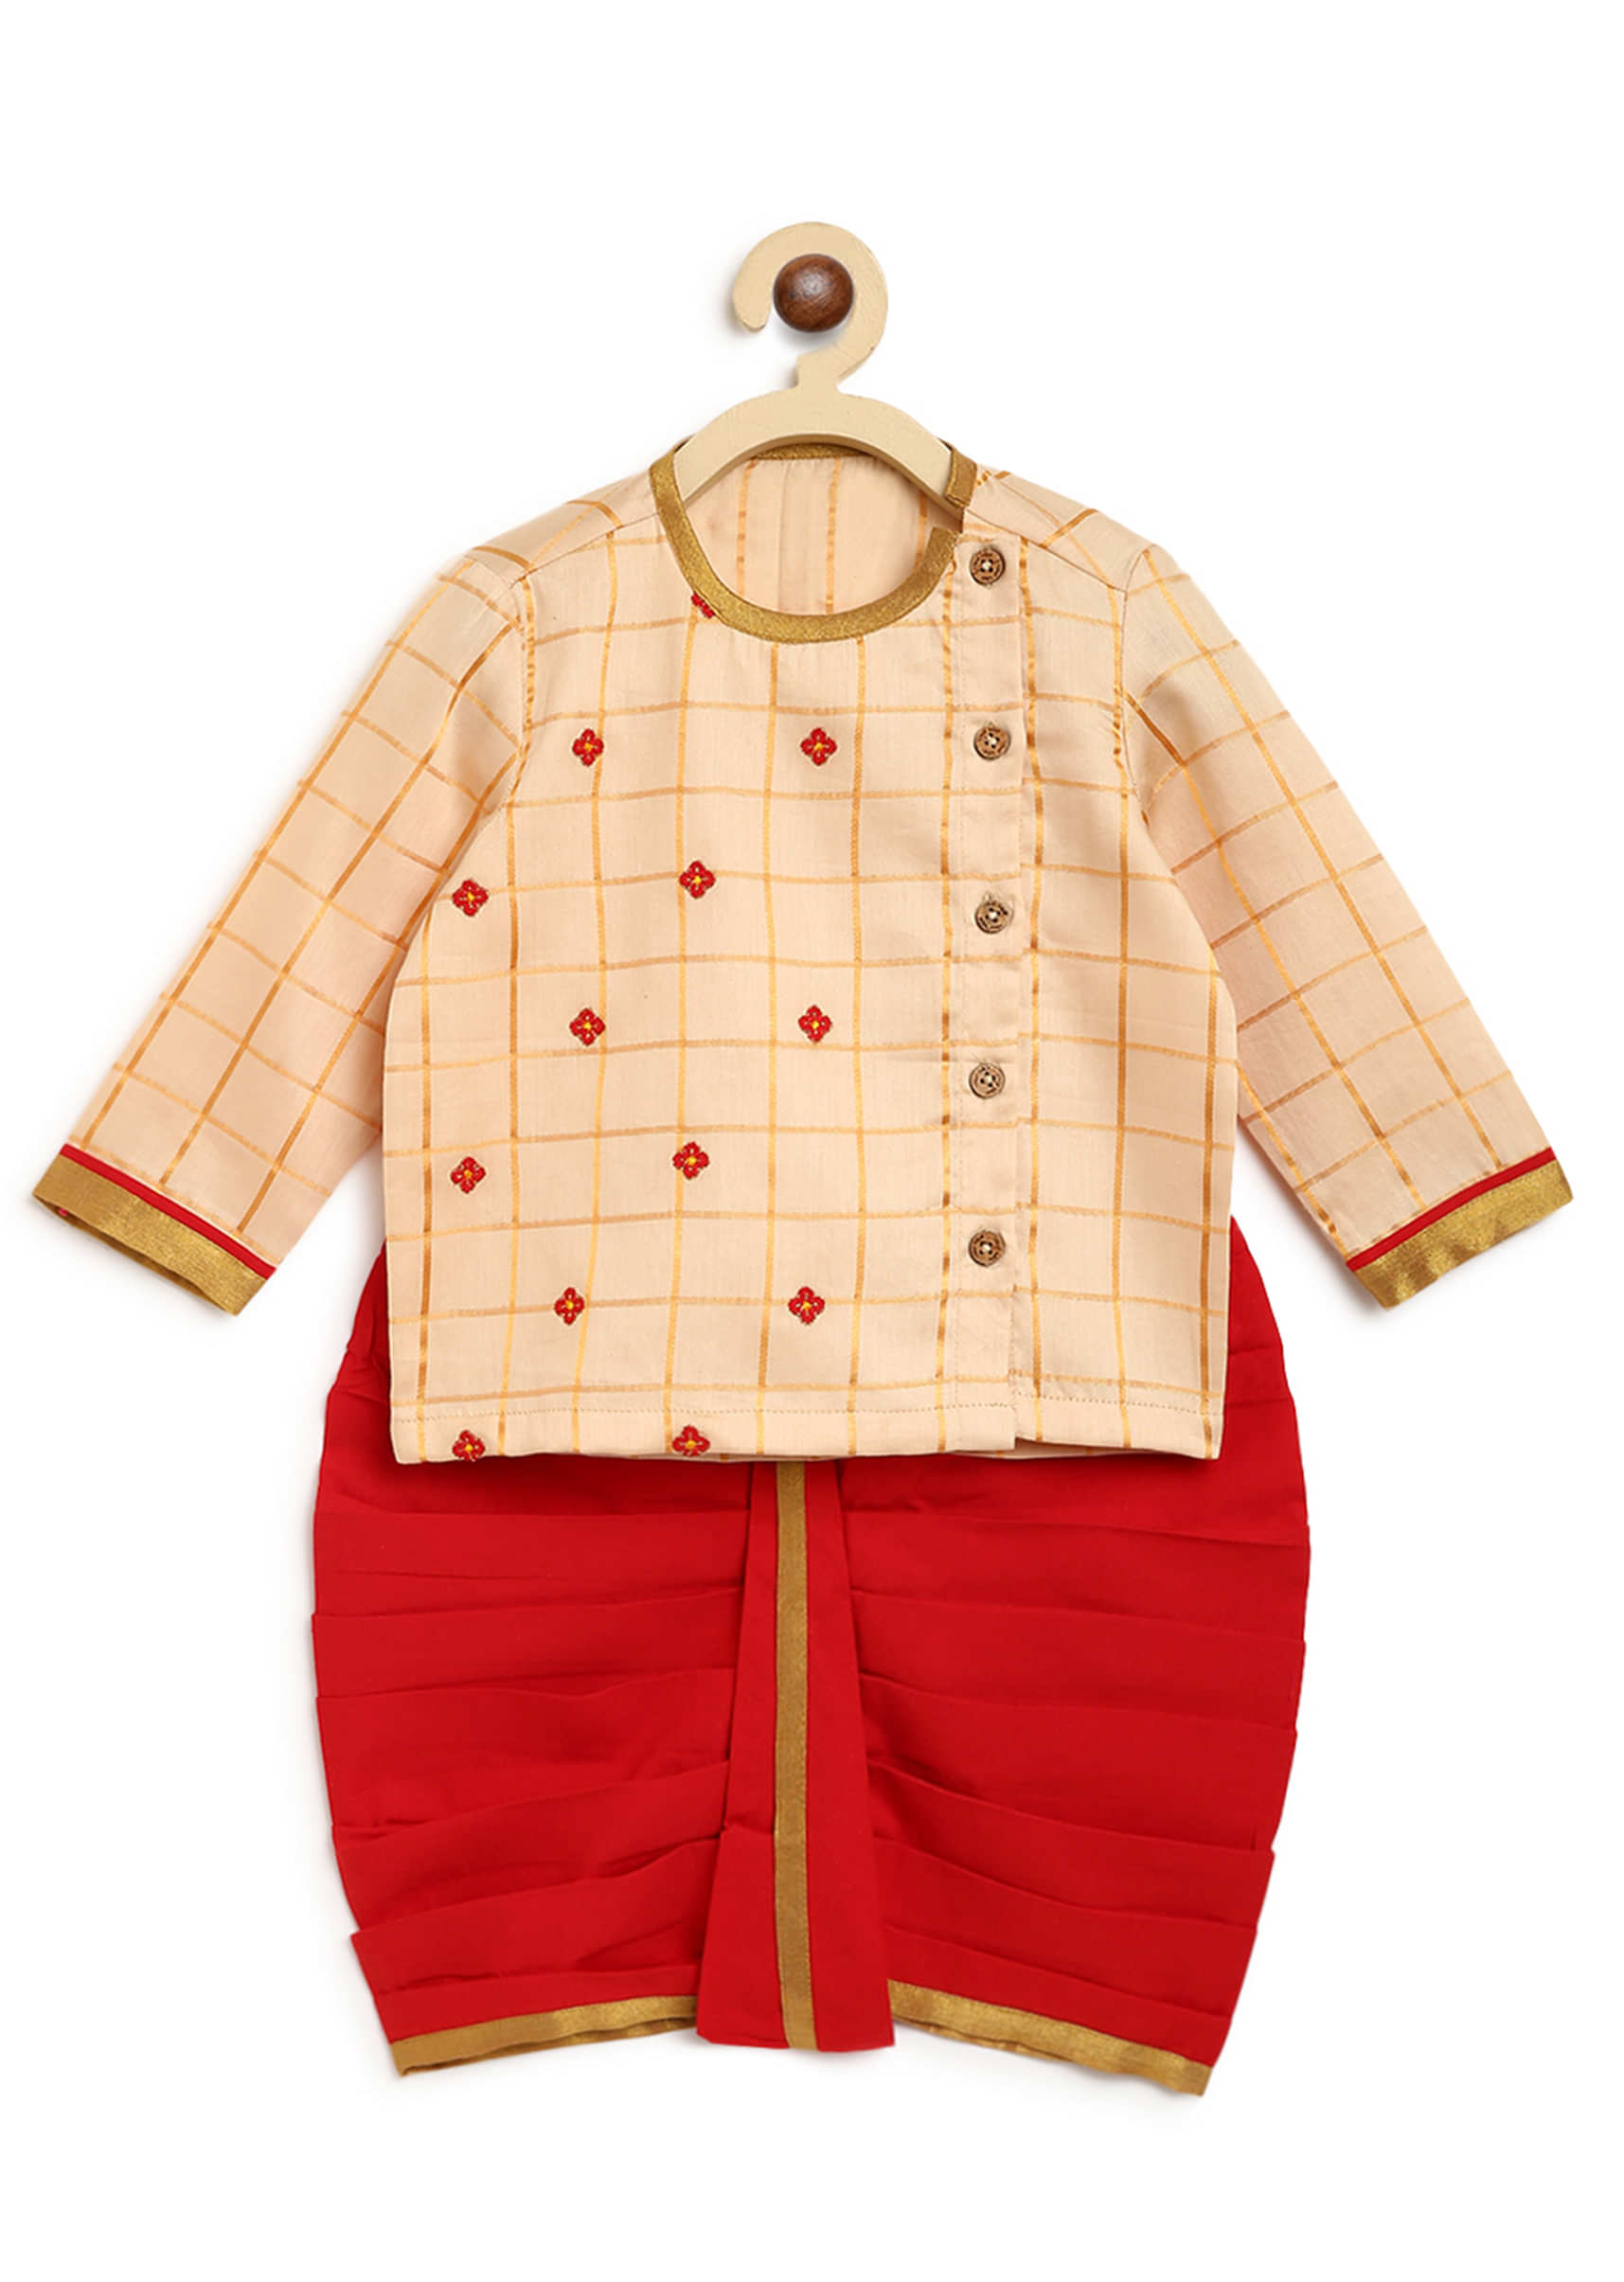 Kalki Boys Beige Kurta And Red Dhoti Set In Cotton With Thread Embroidery Detailing By Tiber Taber